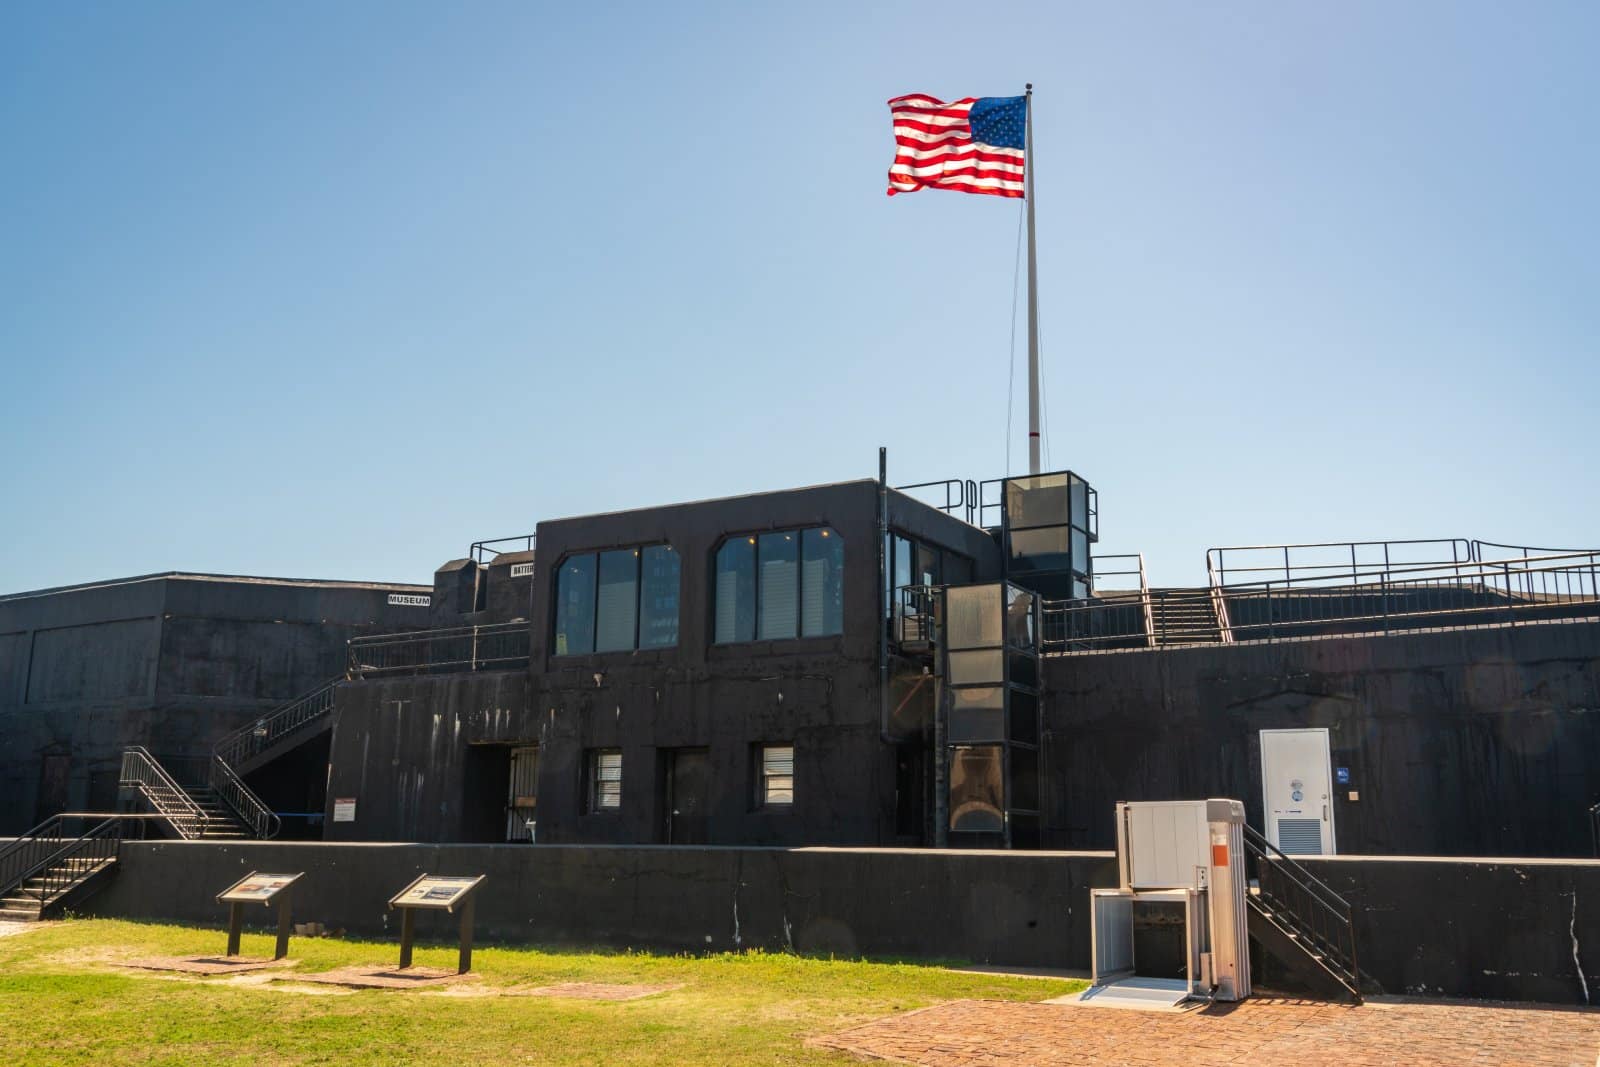 <p class="wp-caption-text">Image Credit: Shutterstock / Zack Frank</p>  <p>The bombardment of Fort Sumter in 1861 marked the opening engagement of the American Civil War. A visit here provides a powerful start to understanding the conflict that shaped the nation.</p>